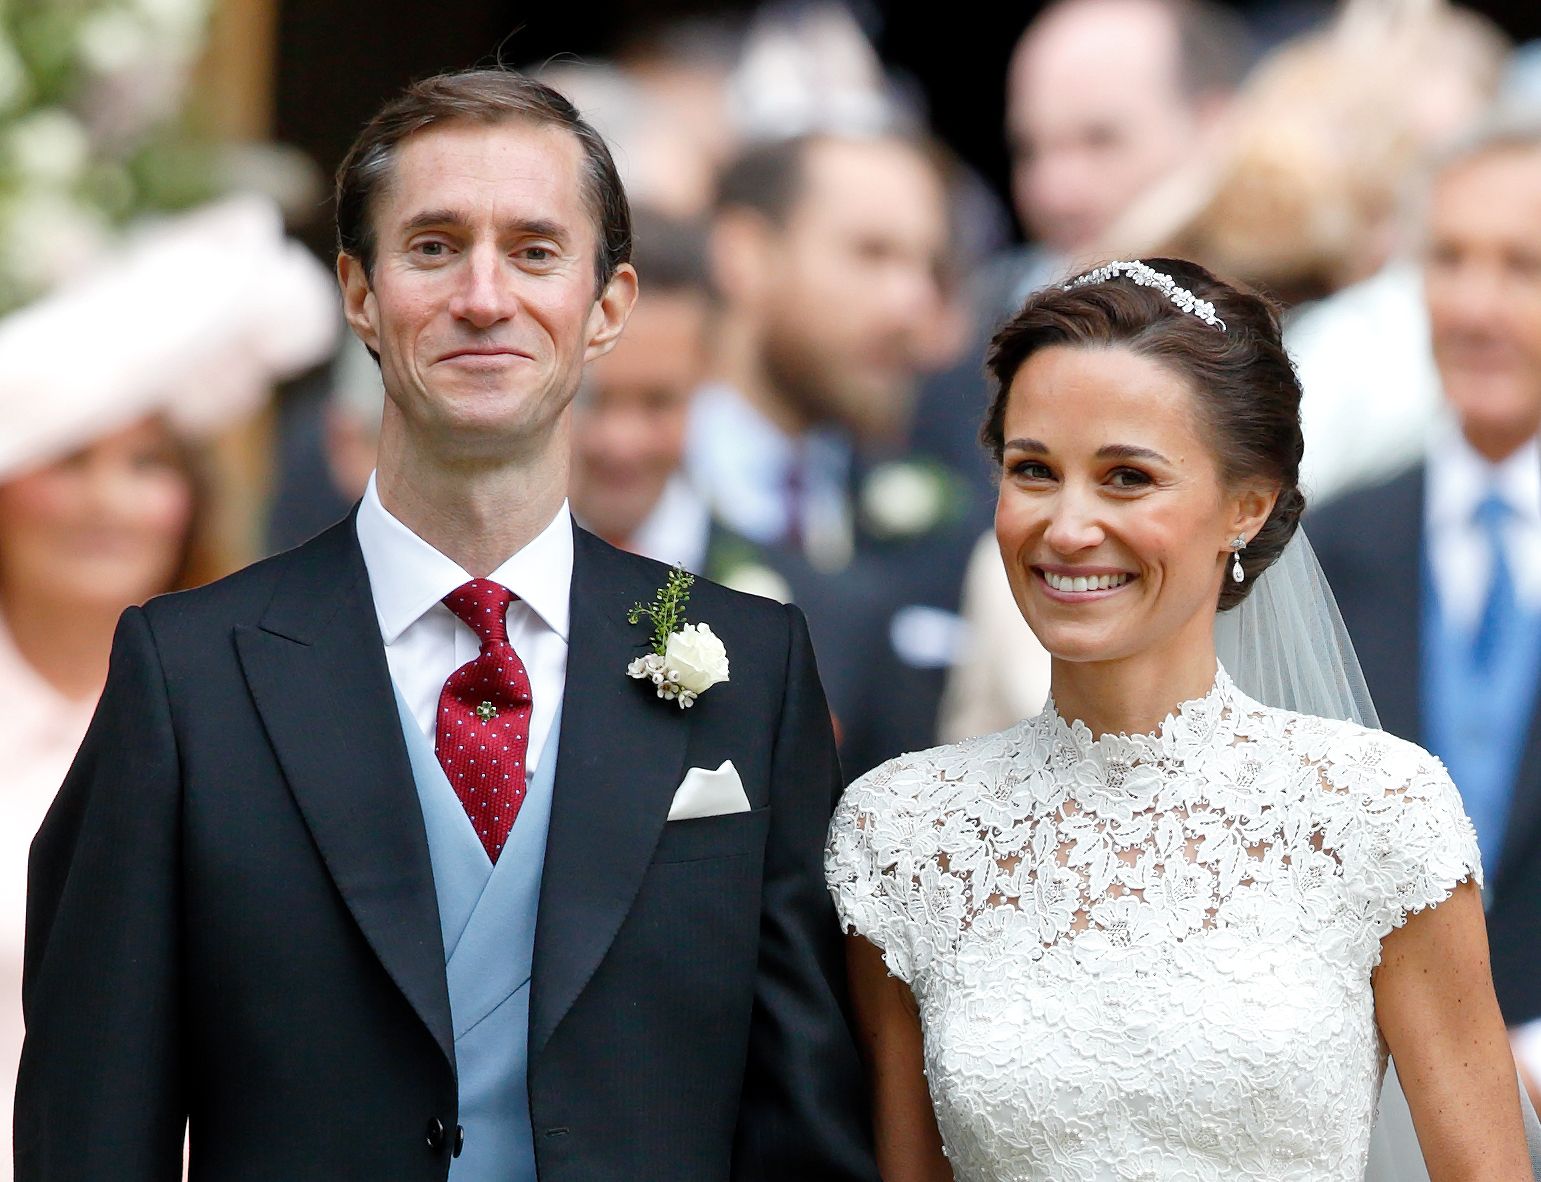 James Matthews and Pippa Middleton leave St Mark's Church after their wedding on May 20, 2017, in Englefield Green, England | Photo: Getty Images